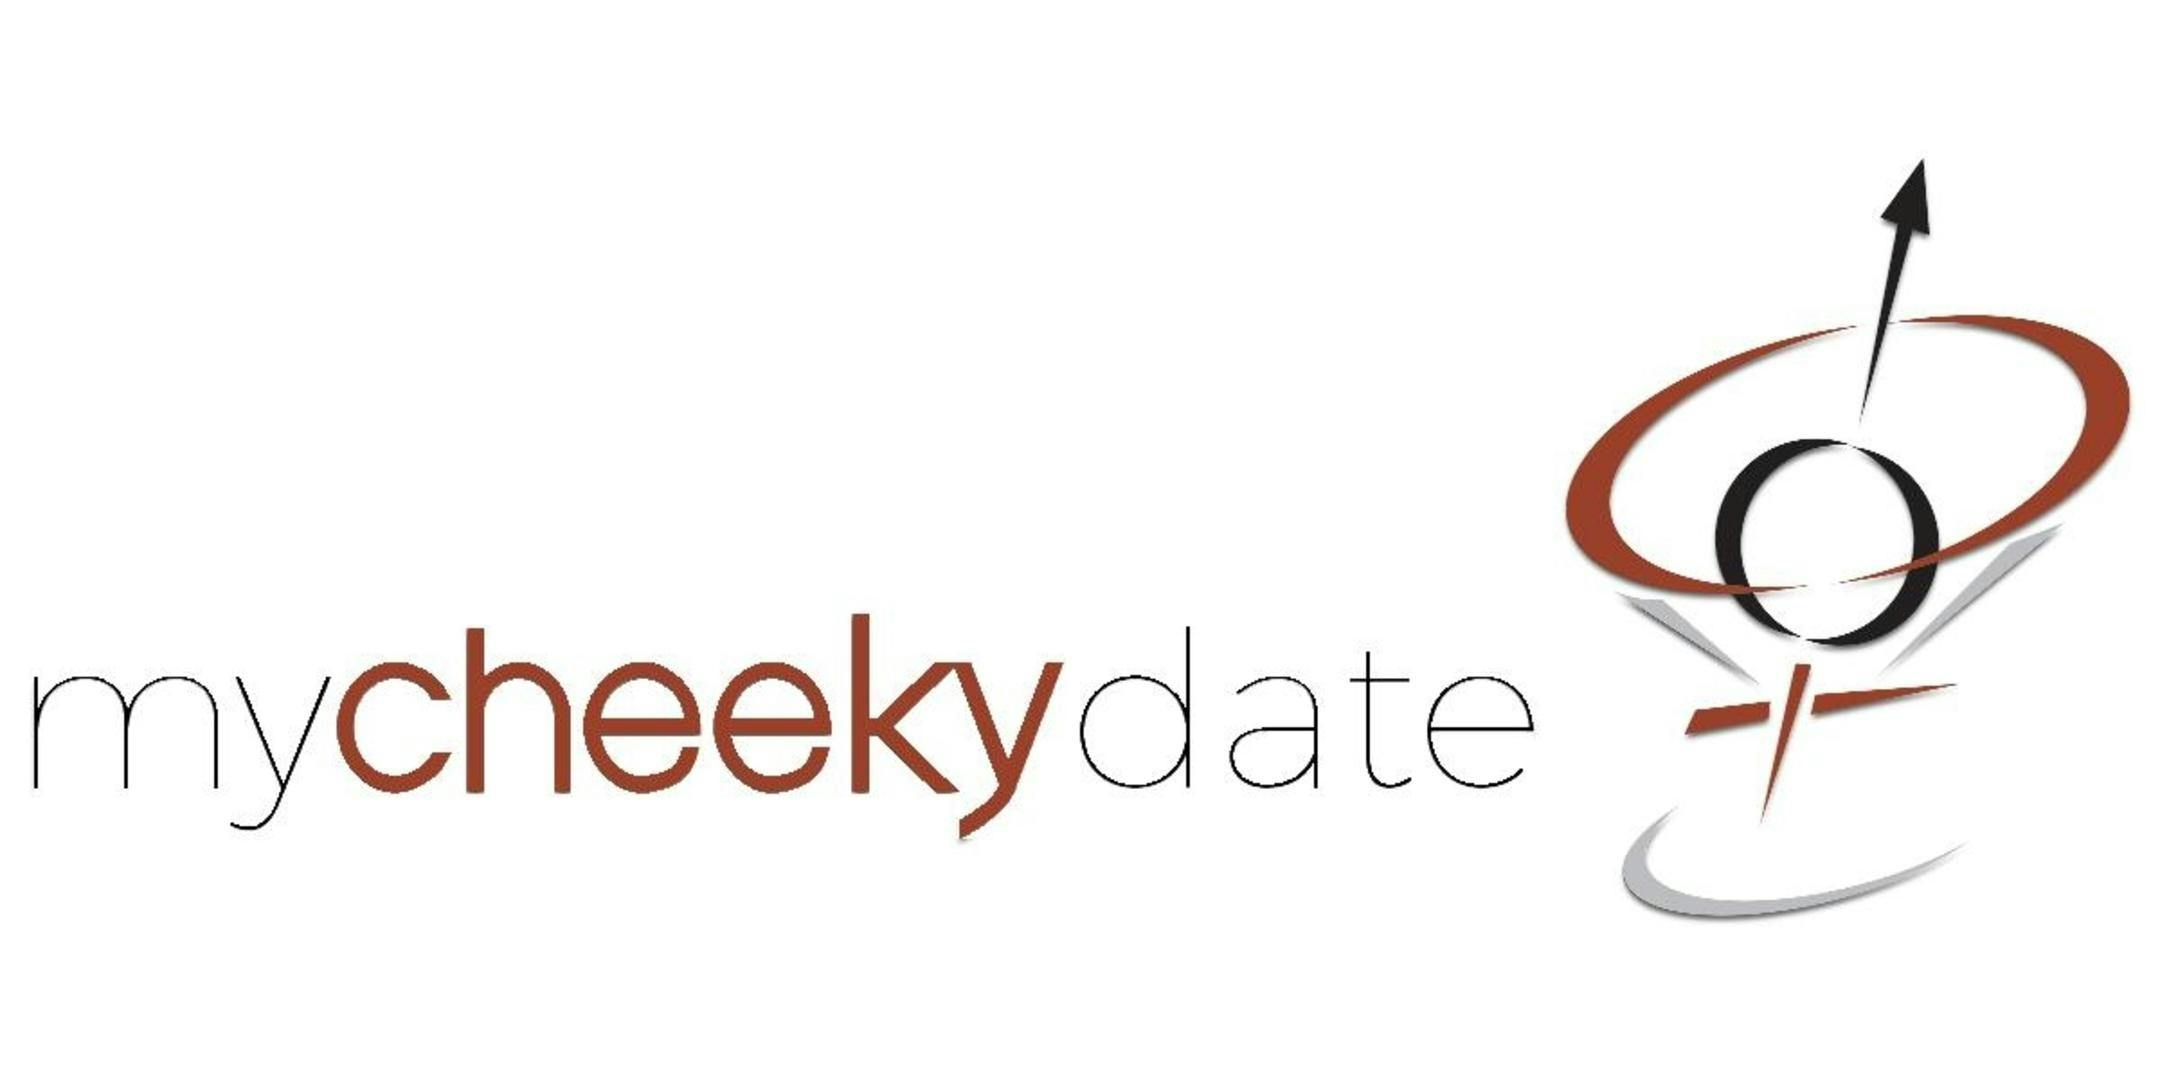 MyCheekyDate Speed Dating | OC Speed Dating For Singles | Let's Get Cheeky Orange County Singles! 